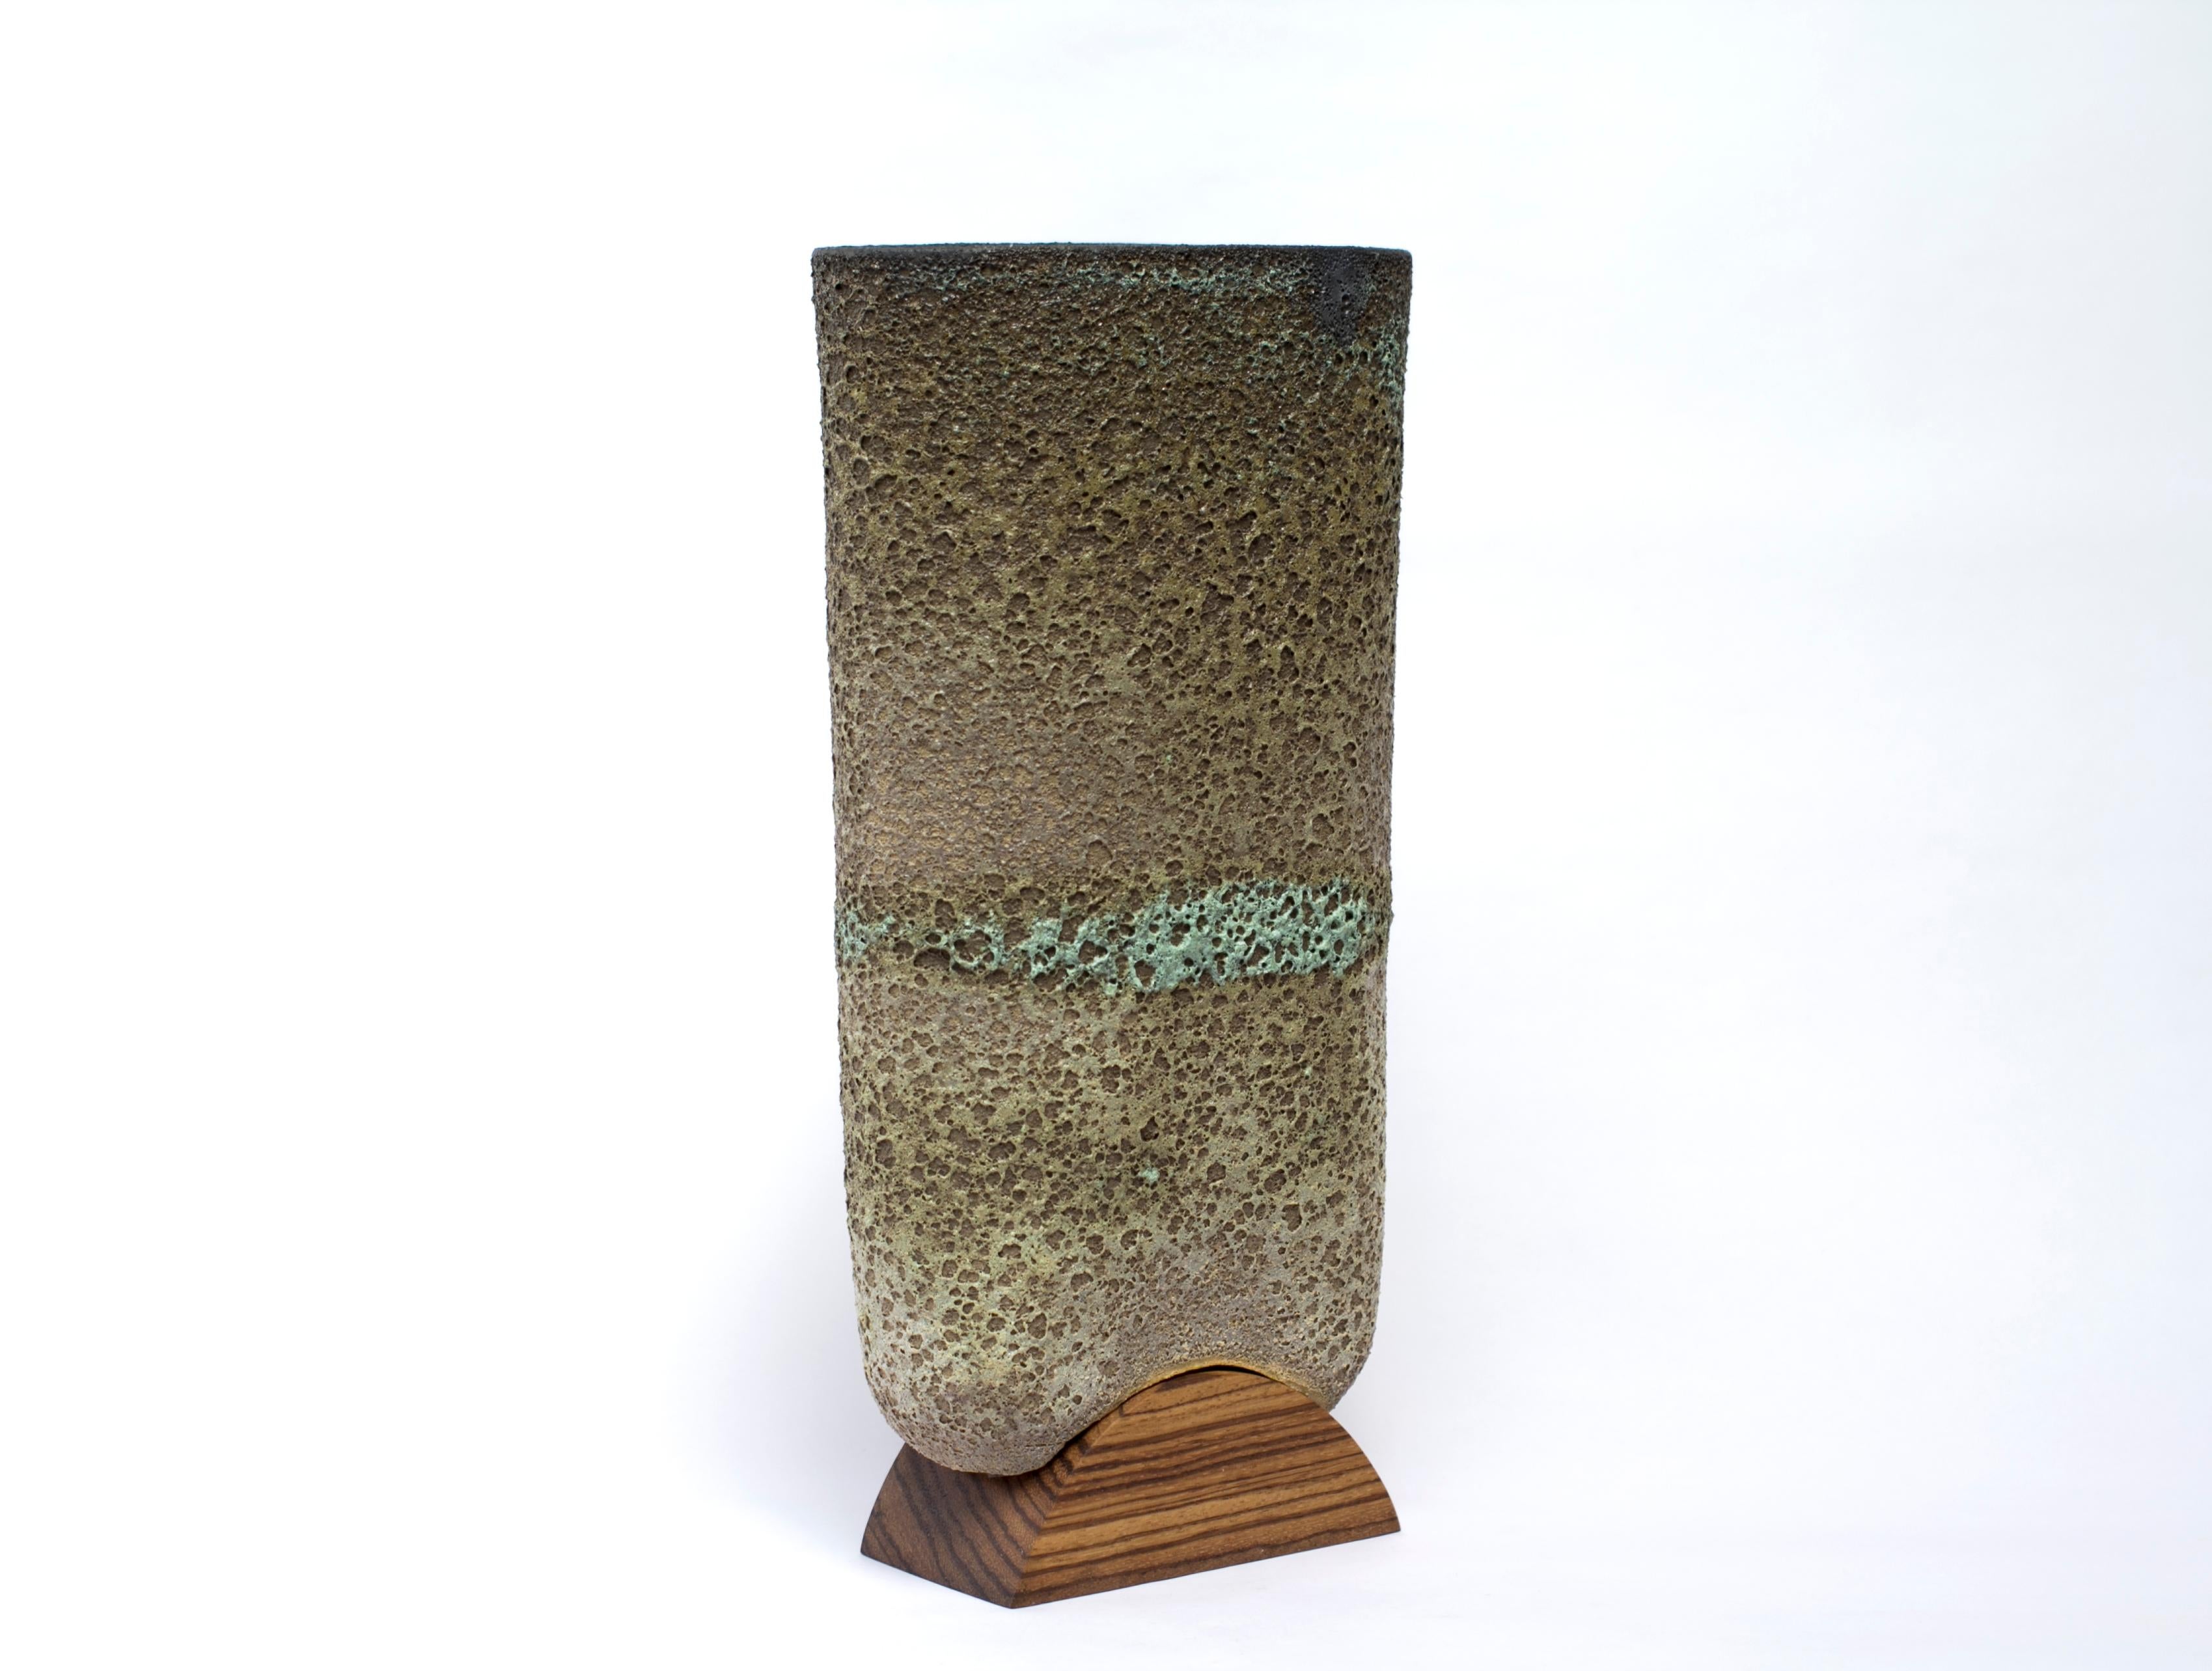 Aaron Poritz

Trophies
Ceramic and glaze, 2018
Small, without wood: approx. 6